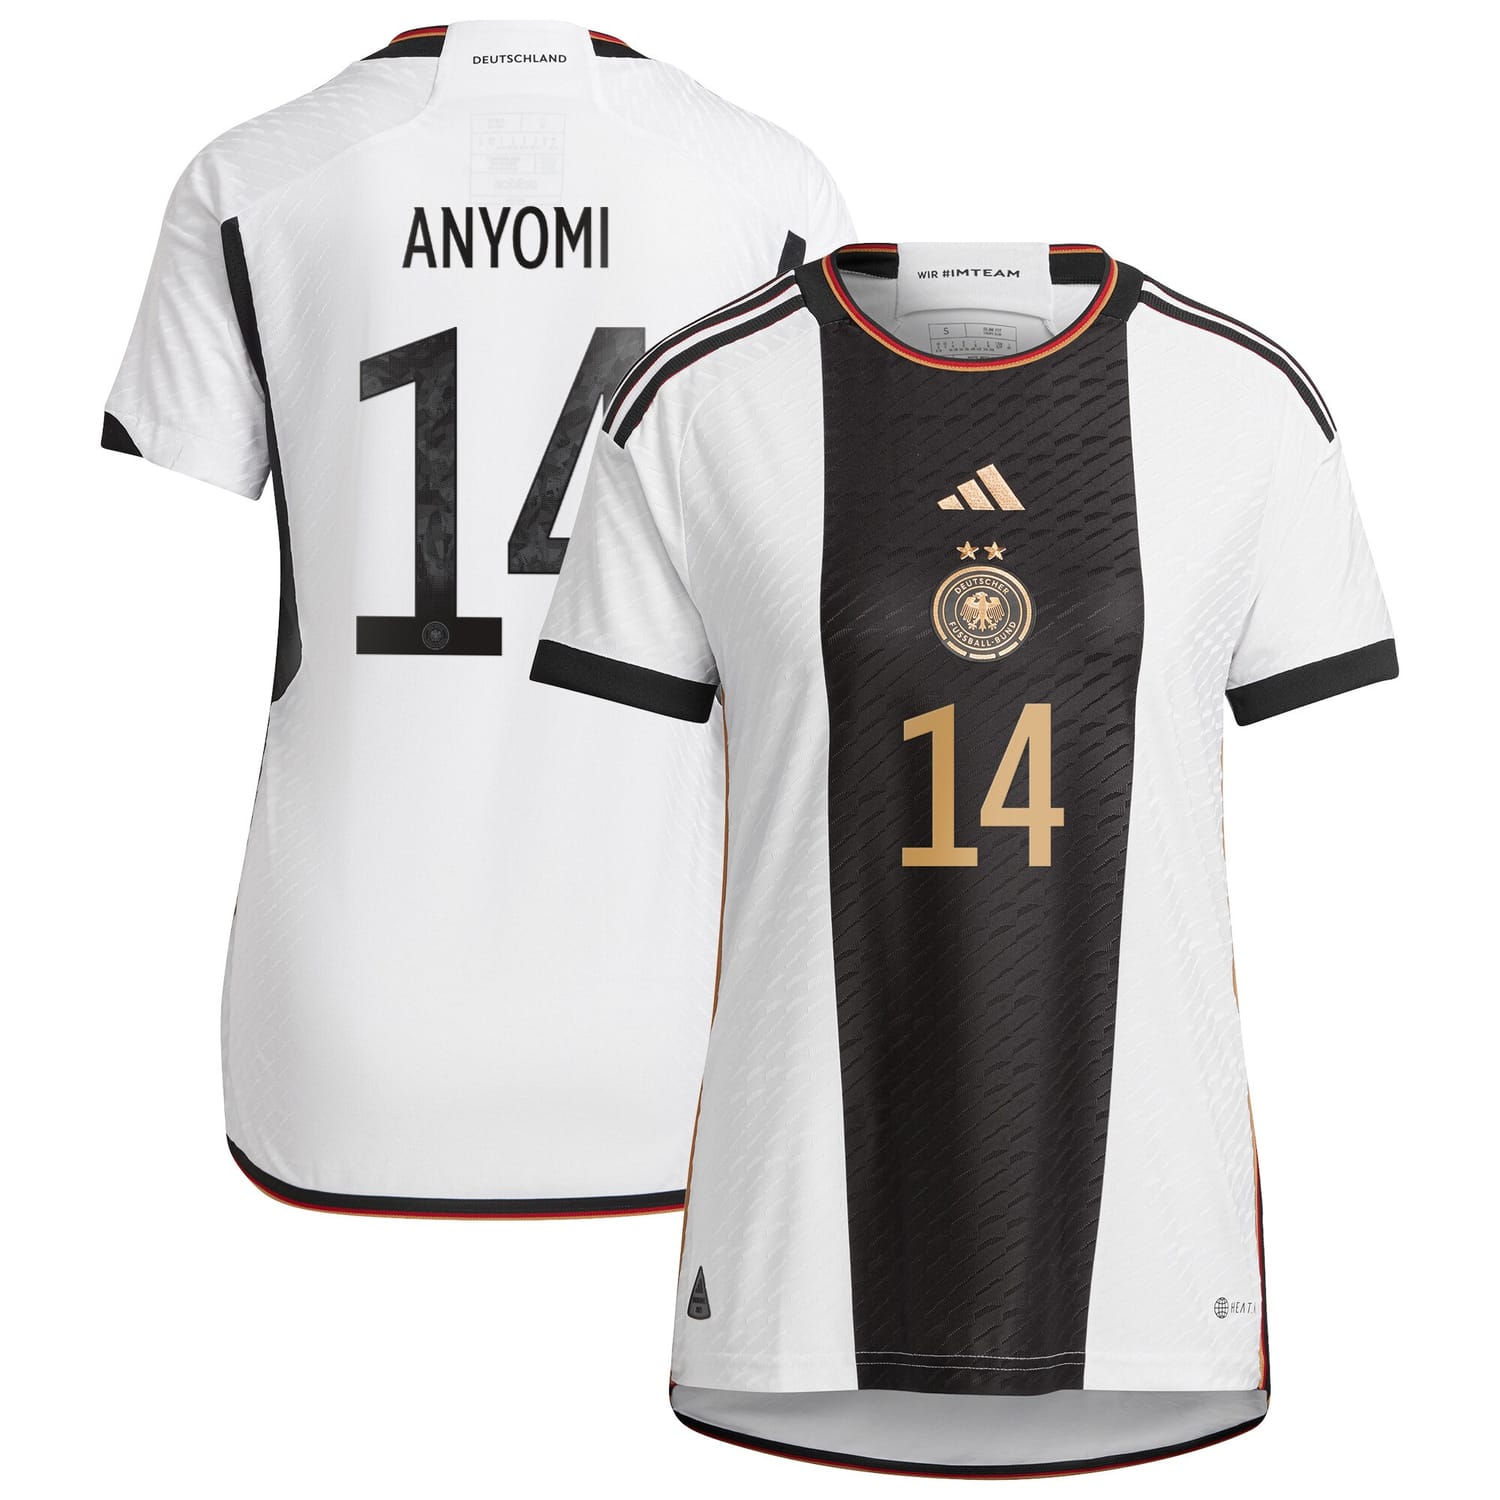 Germany National Team Home Authentic Jersey Shirt player Nicole Anyomi 14 printing for Women